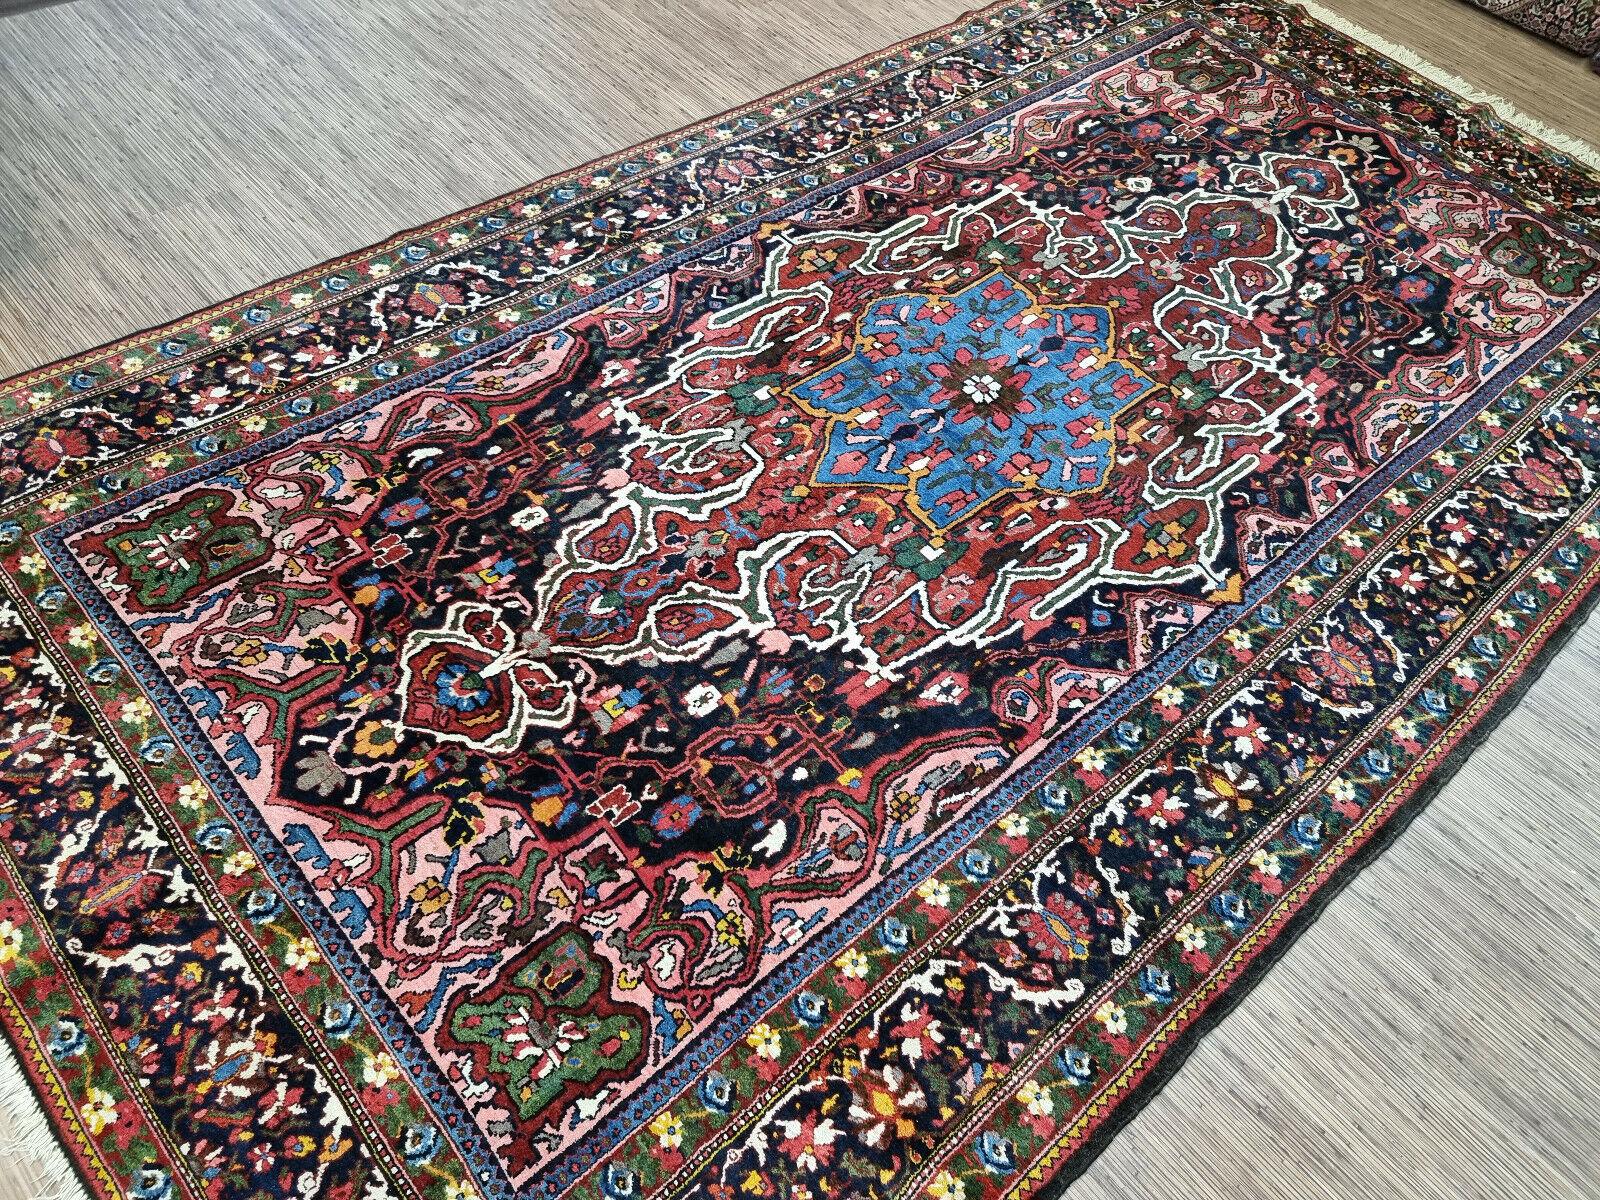 Handmade Antique Persian Style Bakhtiari Rug 7.2' x 13.2', 1920s - 1D74 In Good Condition For Sale In Bordeaux, FR